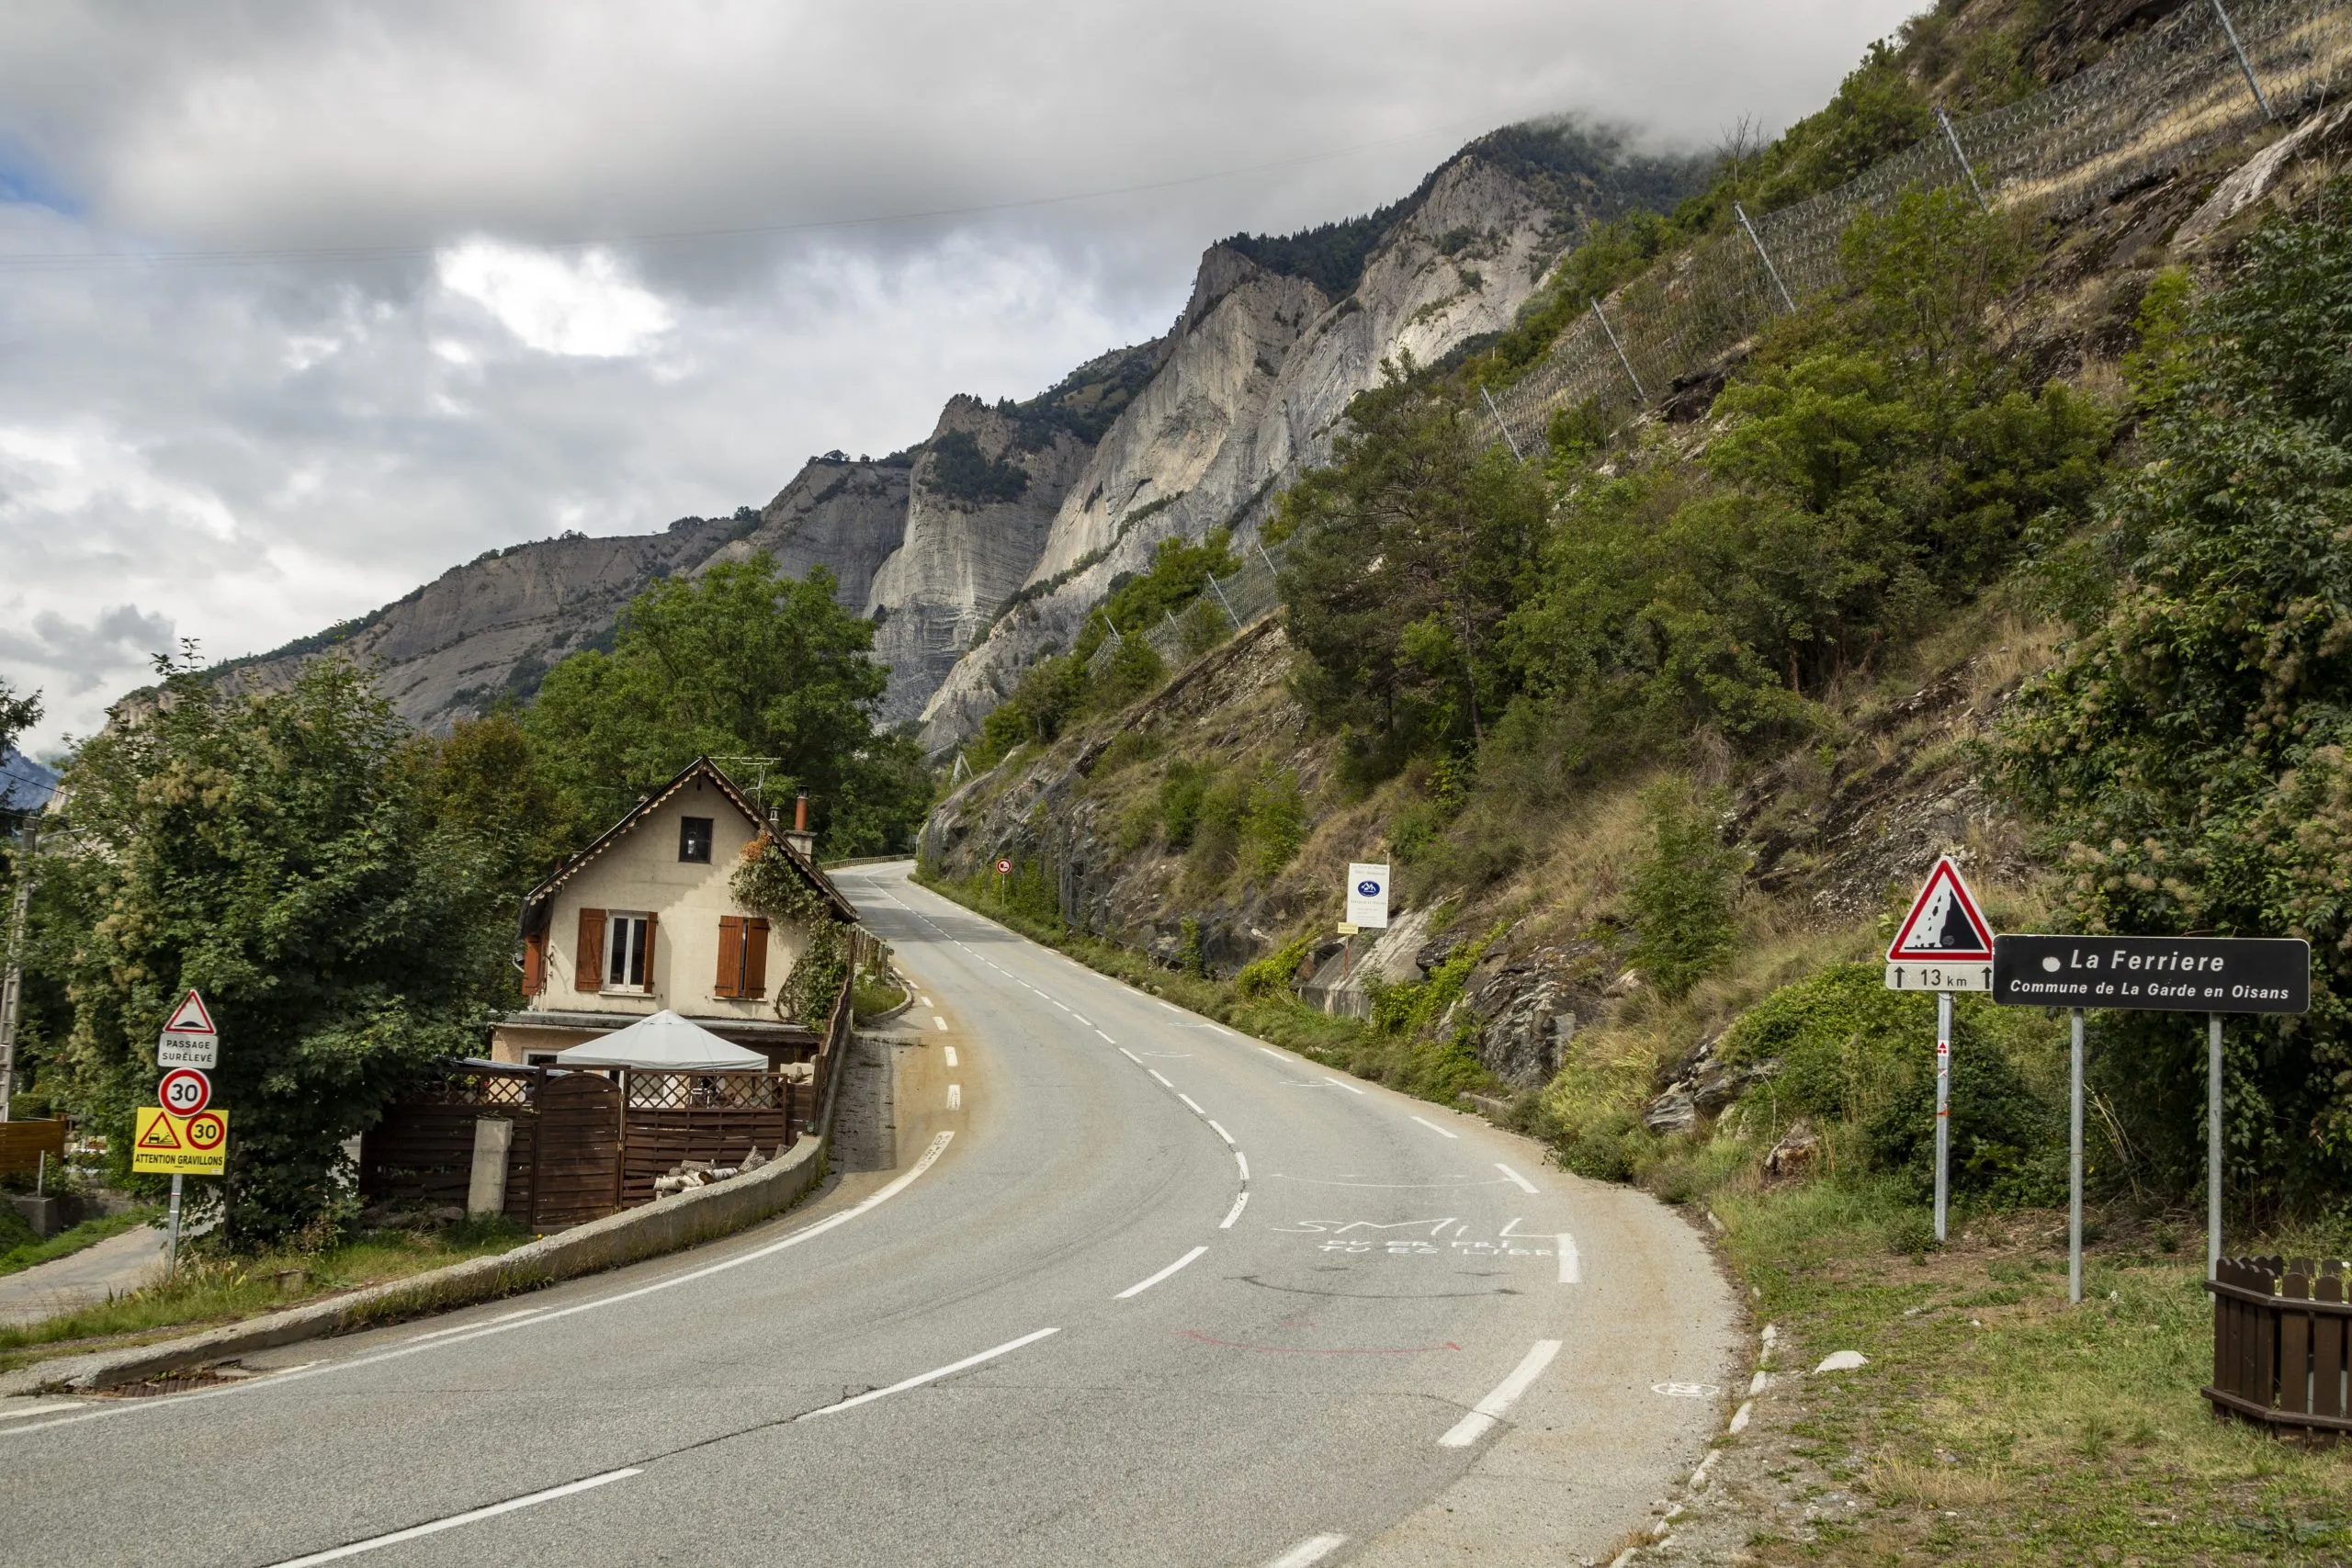 Alpe d'Huez, France - September 20, 2021: Ascent of the famous climb to Alpe d'Huez and itinerary of the Tour de France, pictured are the first meters of the climb